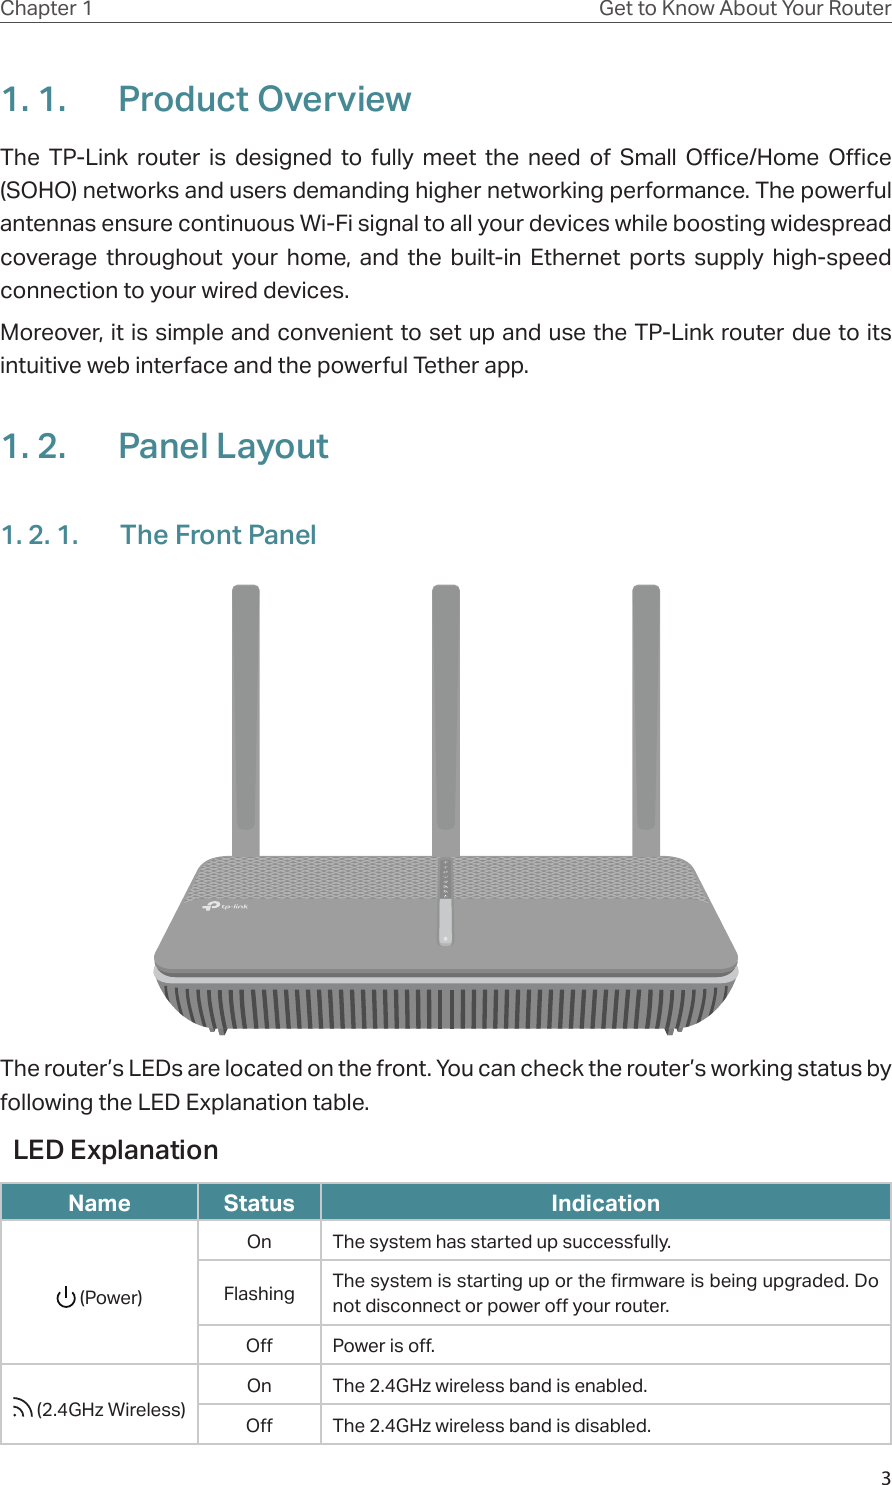 3Chapter 1 Get to Know About Your Router1. 1.  Product OverviewThe TP-Link router is designed to fully meet the need of Small Office/Home Office (SOHO) networks and users demanding higher networking performance. The powerful antennas ensure continuous Wi-Fi signal to all your devices while boosting widespread coverage throughout your home, and the built-in Ethernet ports supply high-speed connection to your wired devices.Moreover, it is simple and convenient to set up and use the TP-Link router due to its intuitive web interface and the powerful Tether app.  1. 2.  Panel Layout1. 2. 1.  The Front PanelThe router’s LEDs are located on the front. You can check the router’s working status by following the LED Explanation table.LED ExplanationName Status Indication (Power)On The system has started up successfully.Flashing The system is starting up or the firmware is being upgraded. Do not disconnect or power off your router.Off Power is off.  (2.4GHz Wireless)On The 2.4GHz wireless band is enabled.Off The 2.4GHz wireless band is disabled.